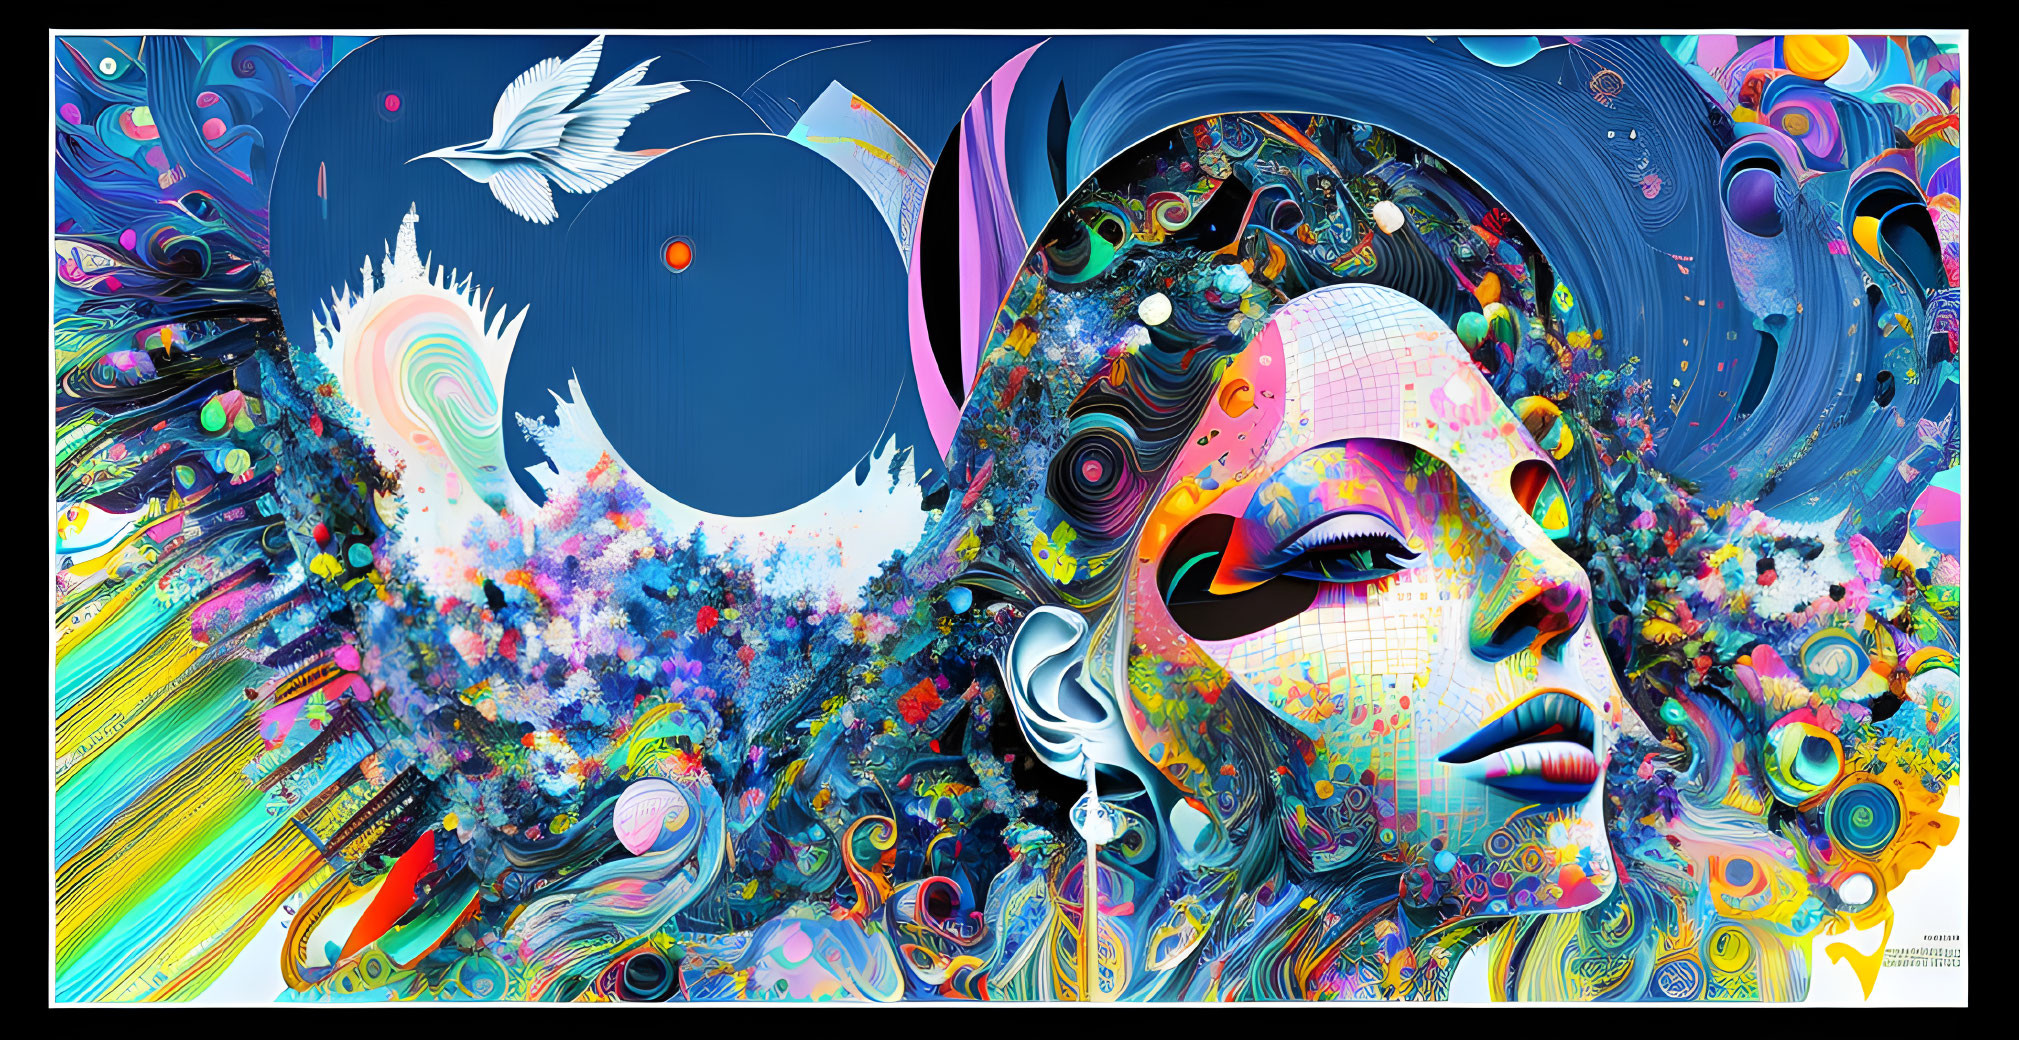 Colorful abstract artwork: woman's face, swirling patterns, plants, bird, crescent moon